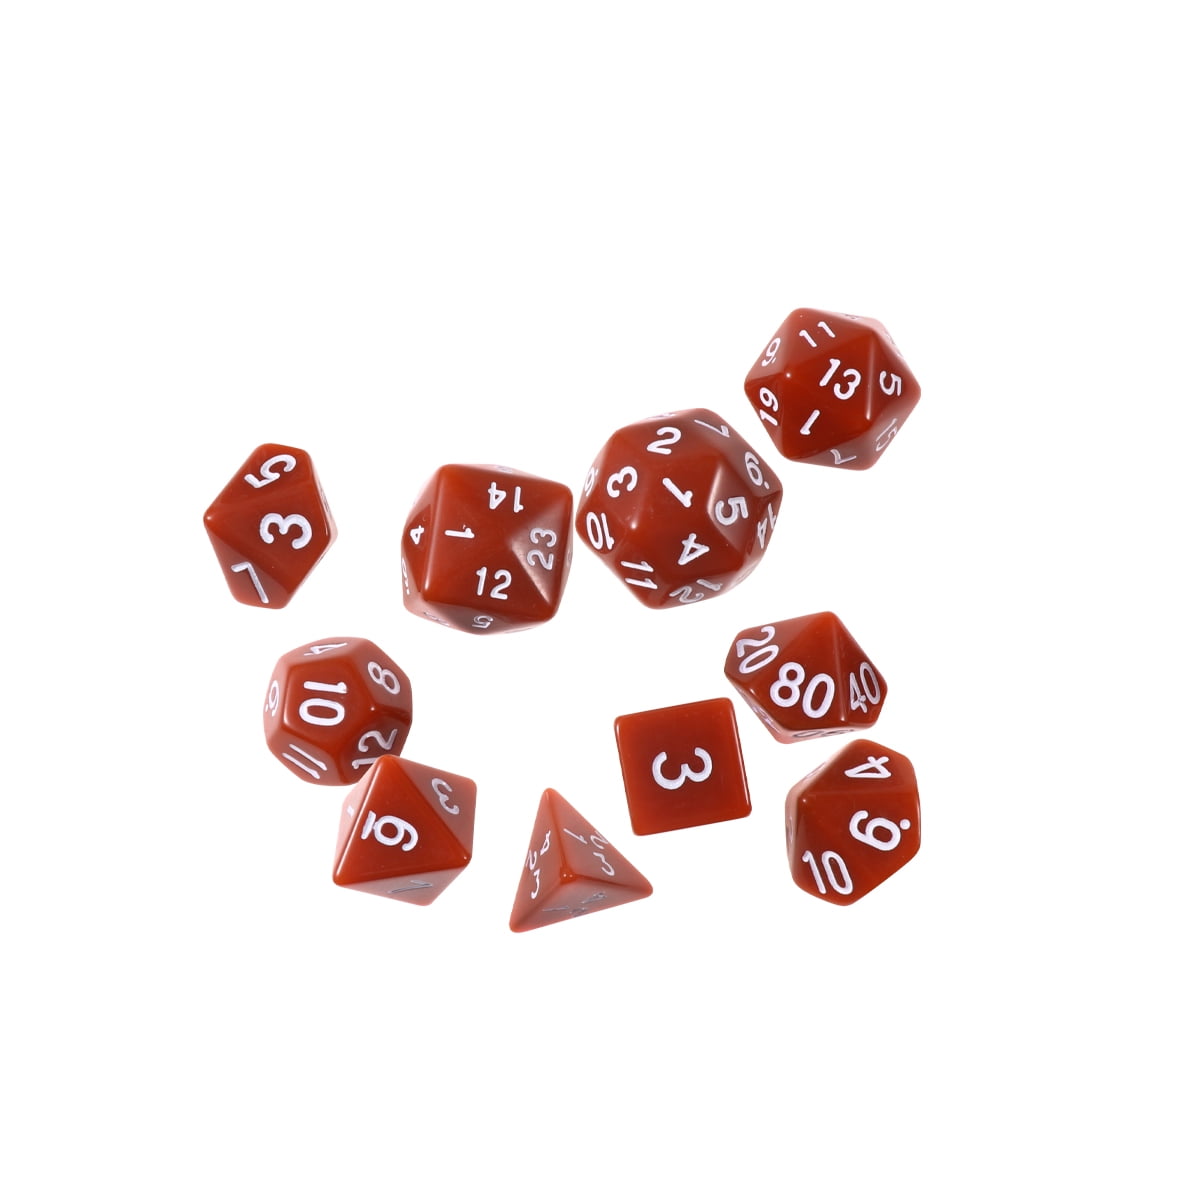 10pcs/Set For Game Polyhedral Multi Sided Acrylic Poker Dice Funny Acrylic Dices 